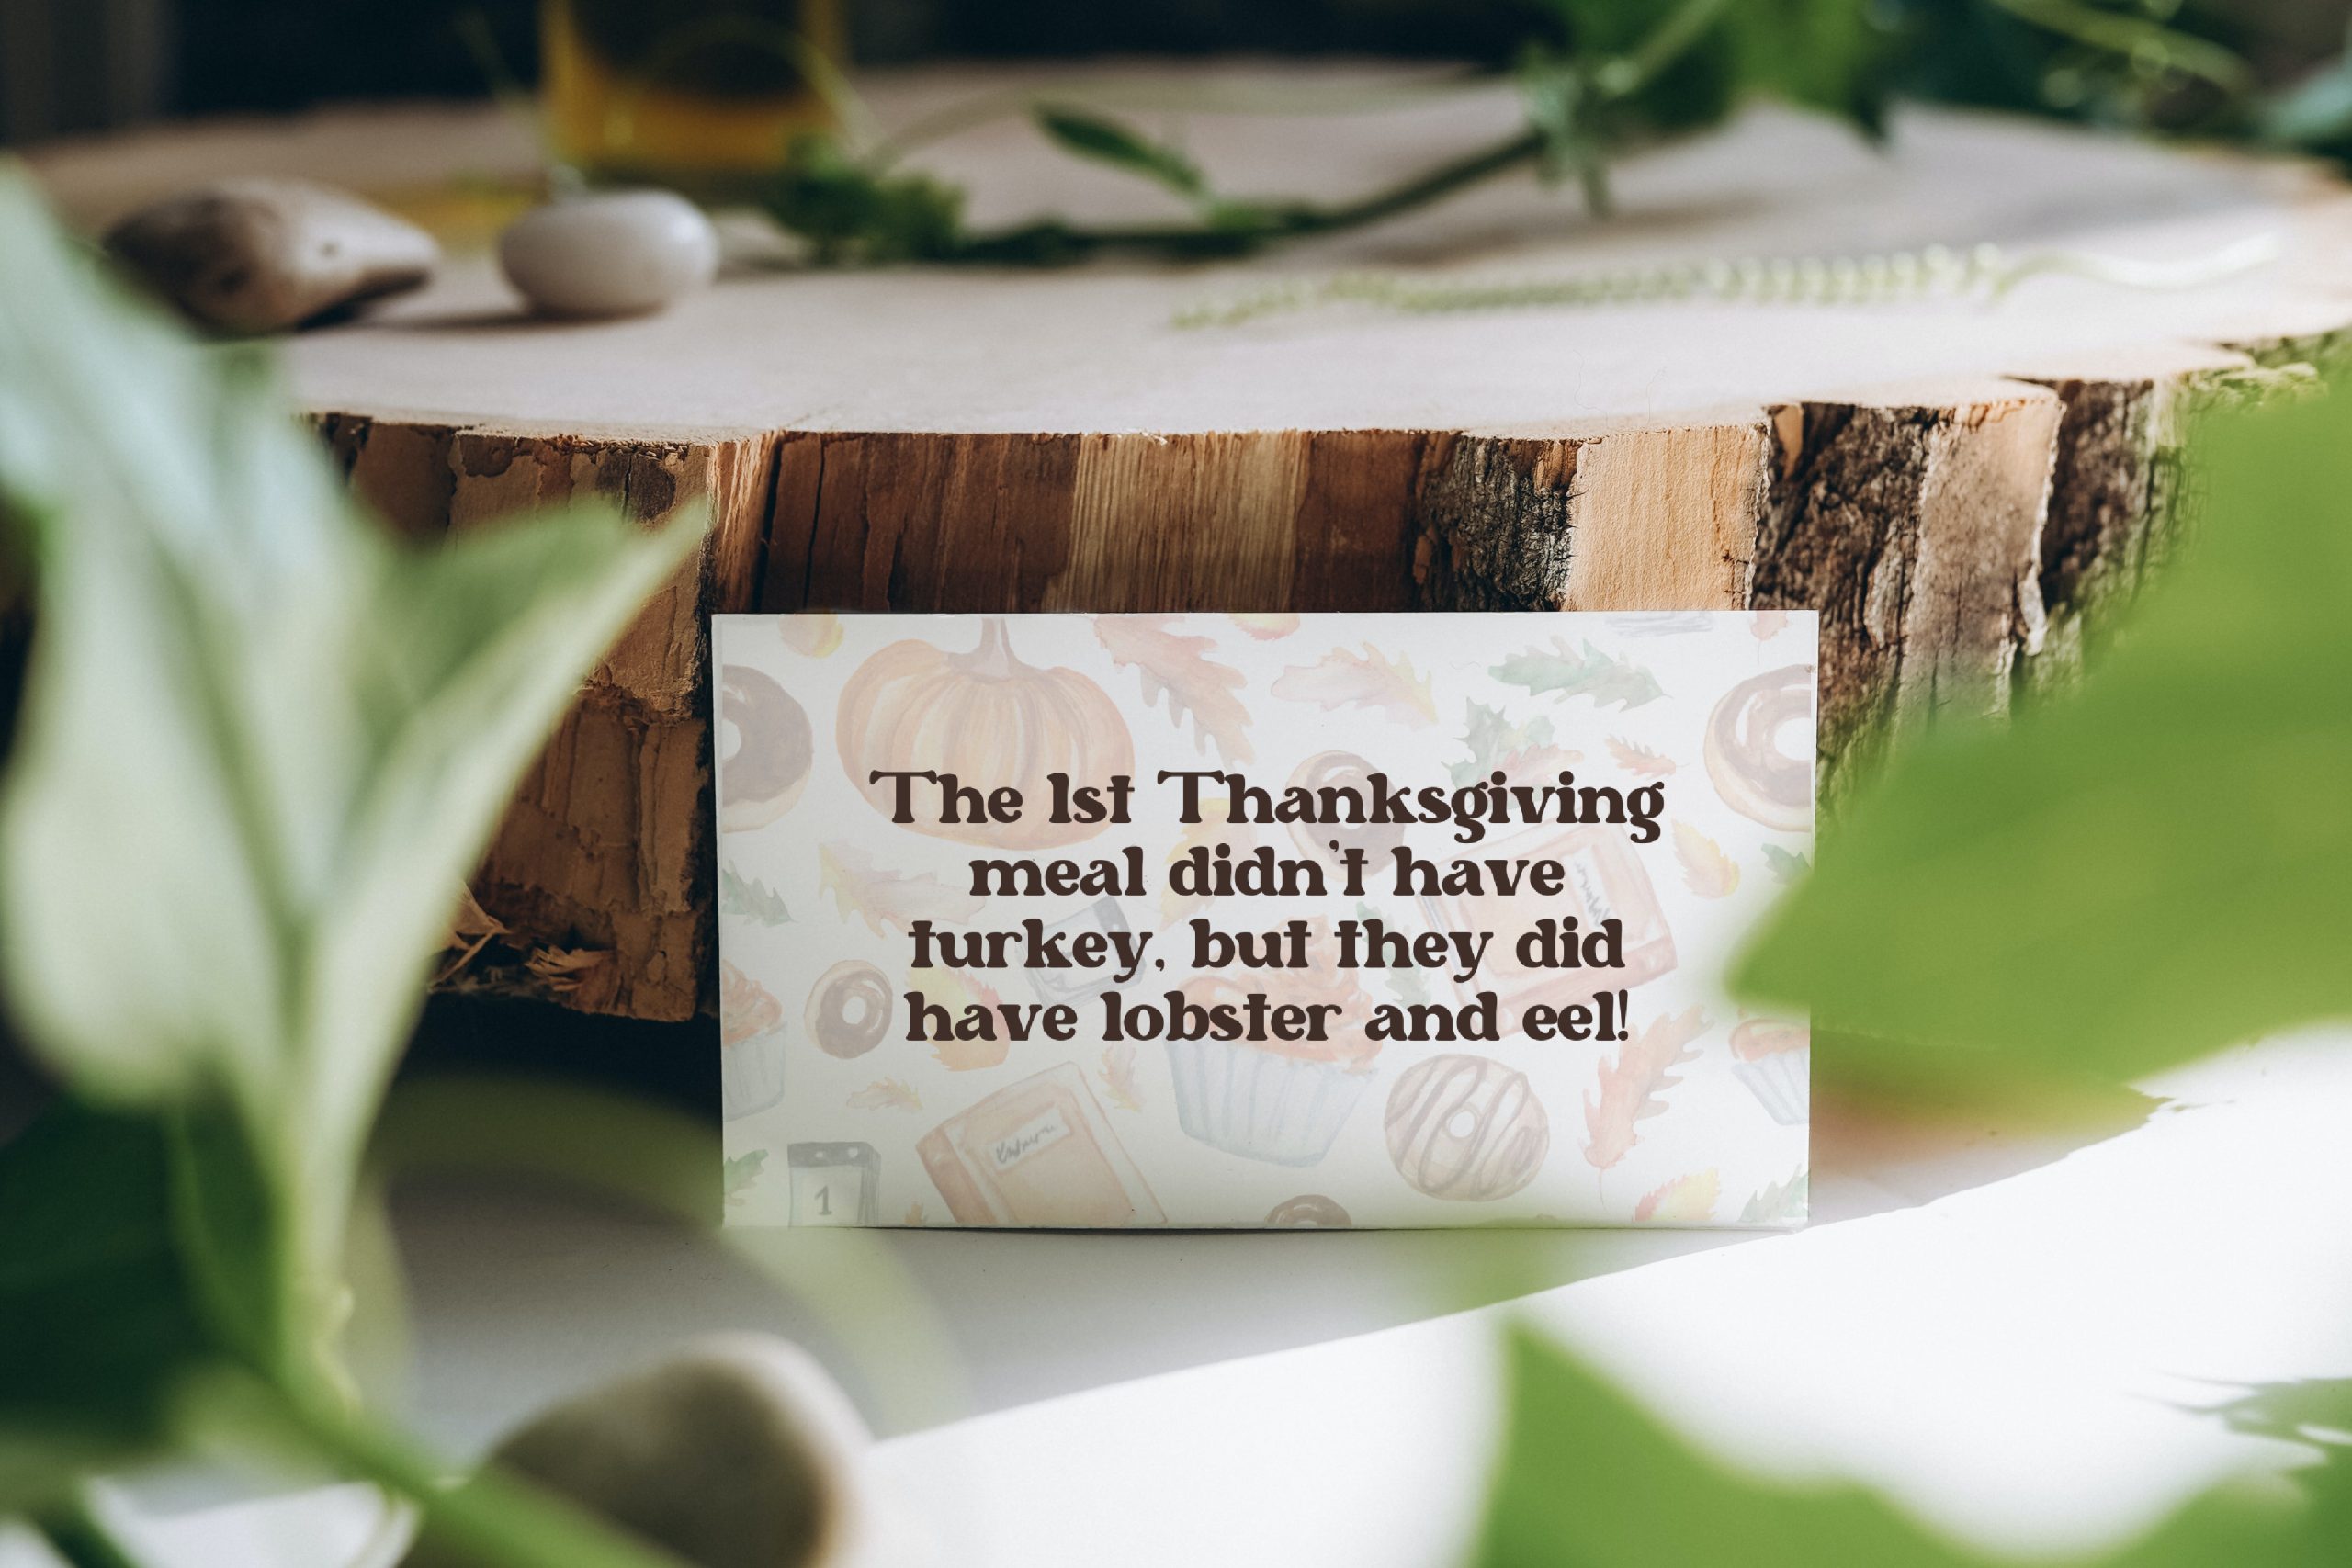 Thanksgiving trivia card leaned up on table decorations